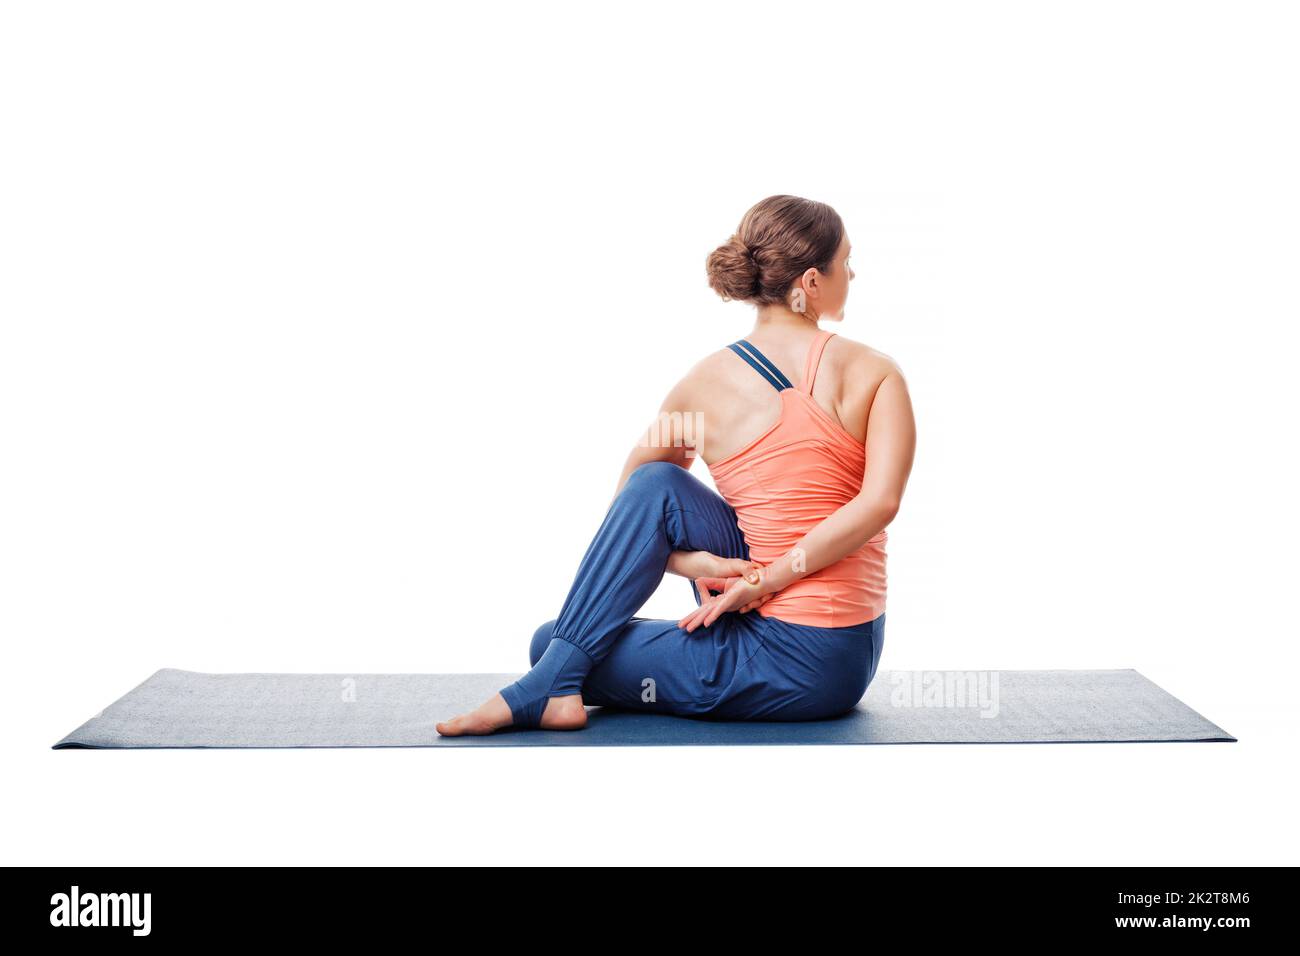 Premium Photo | Ardha matsyendrasana. half lord of the fishes pose. young  woman practices yoga indoors on white background. yoga instructor.